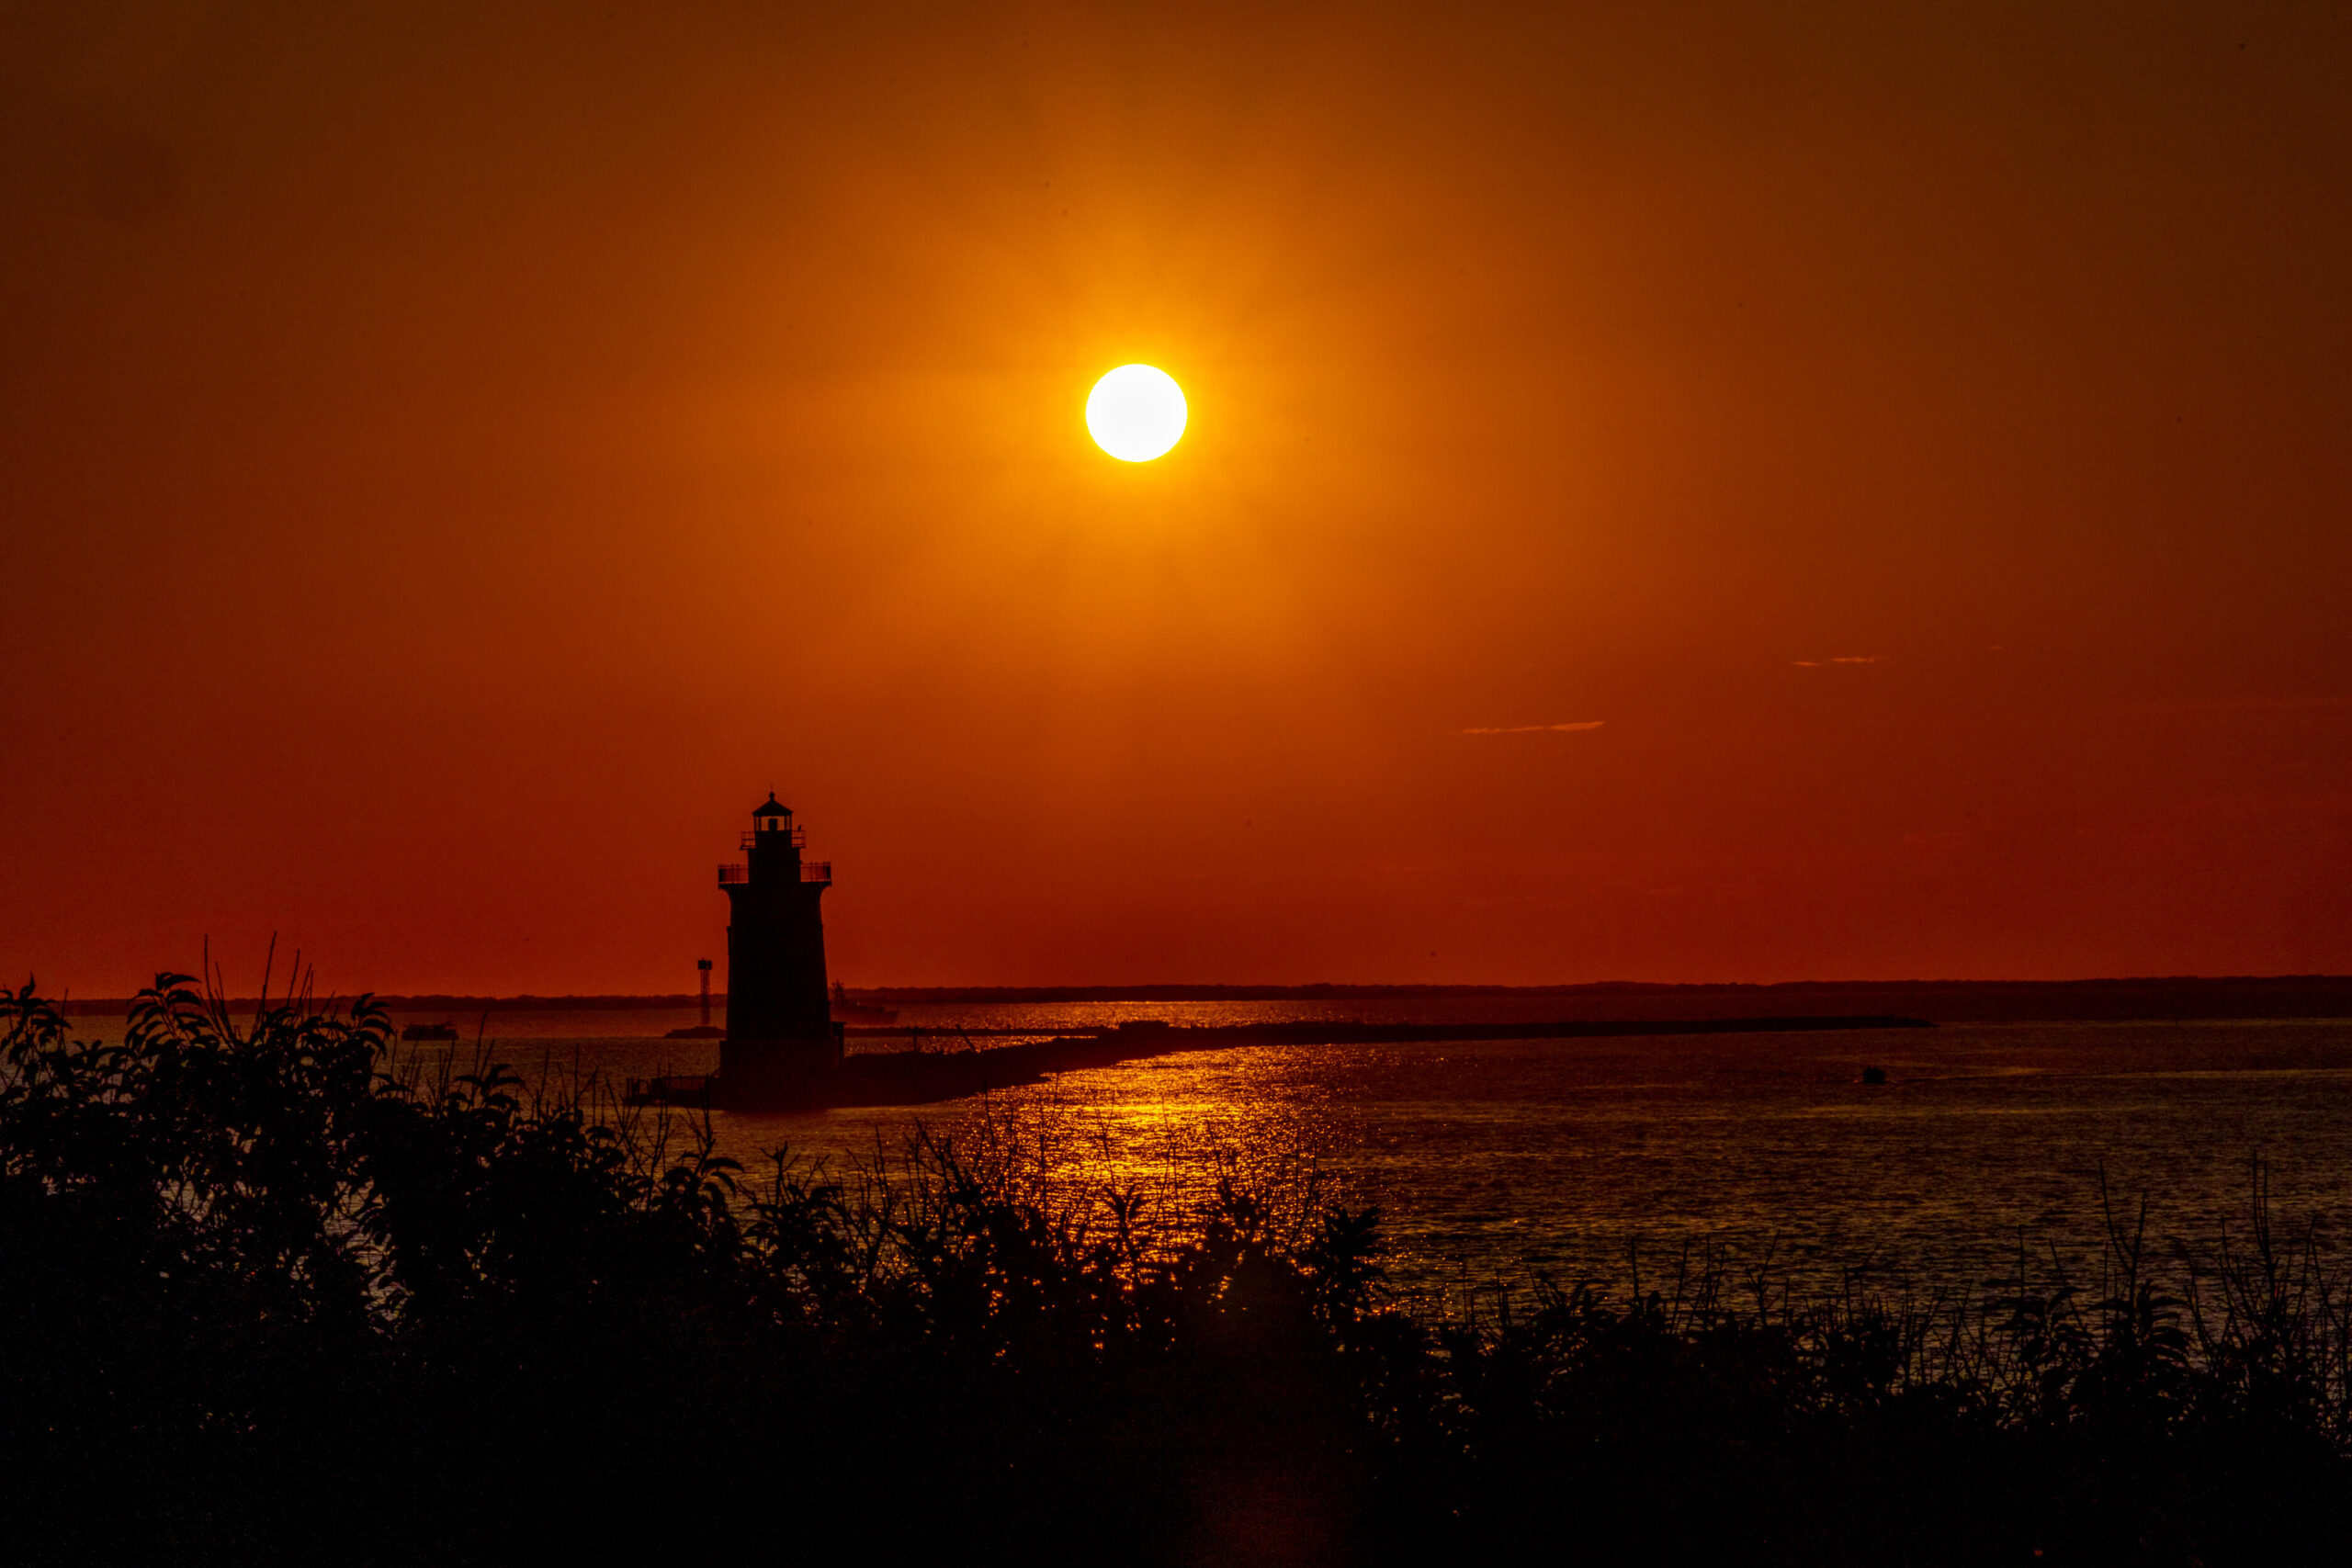 dramatic golden sunset with orange sky and a silhouette of lighthouse in a bay